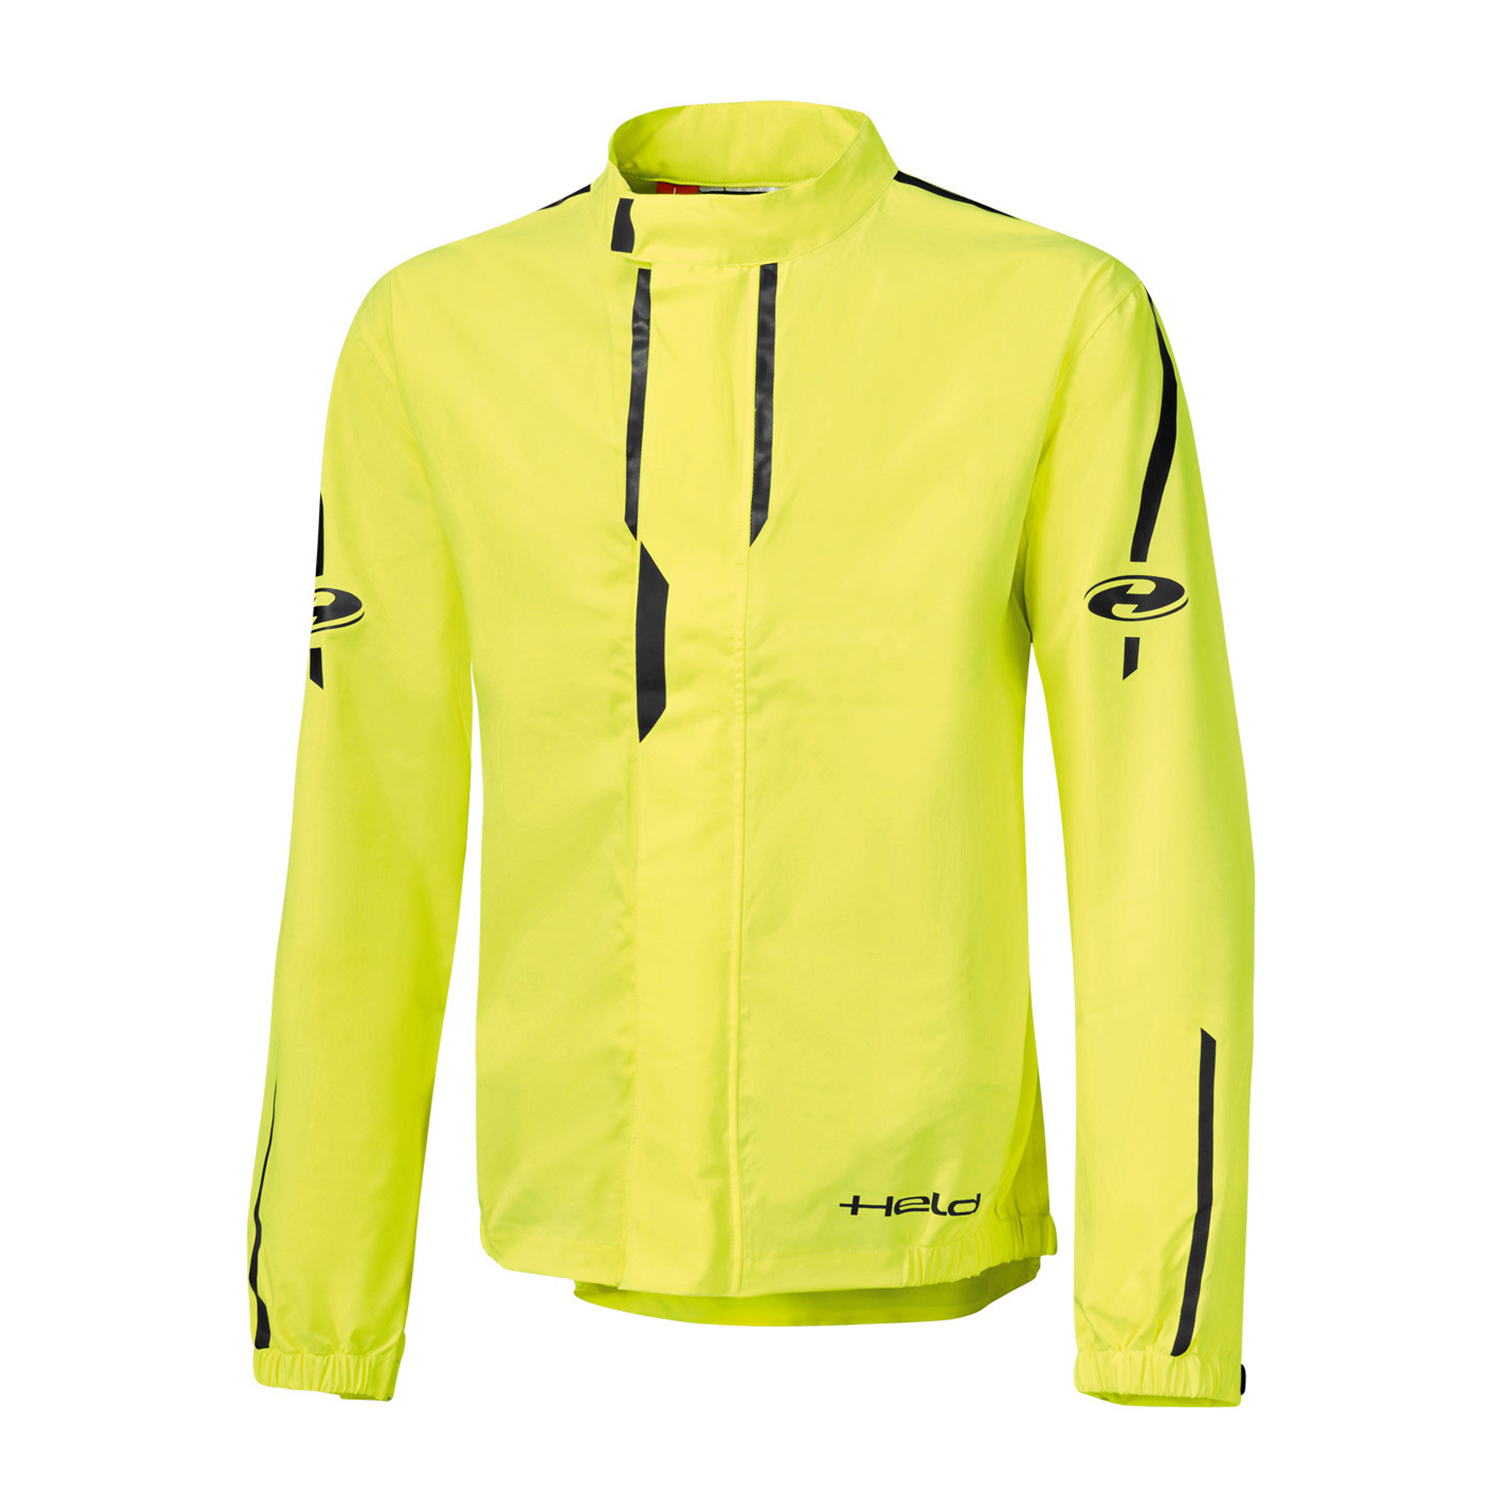 Held Rainstorm Top Fluorescent Yellow-Black - Available in Various Sizes